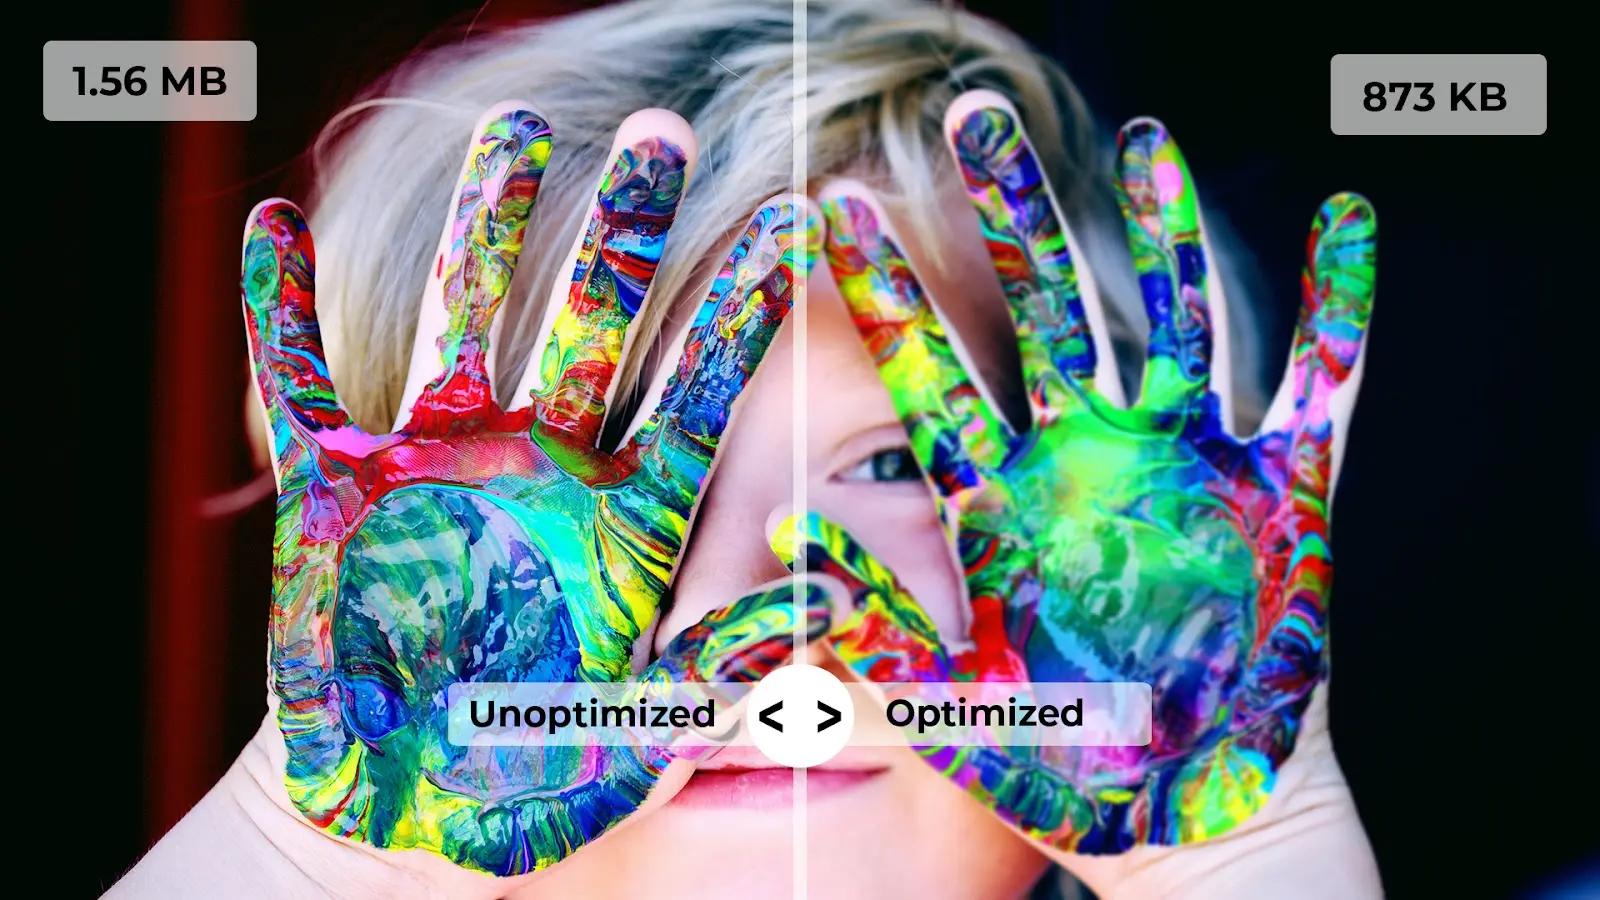 A visual comparison of unoptimized and optimized images